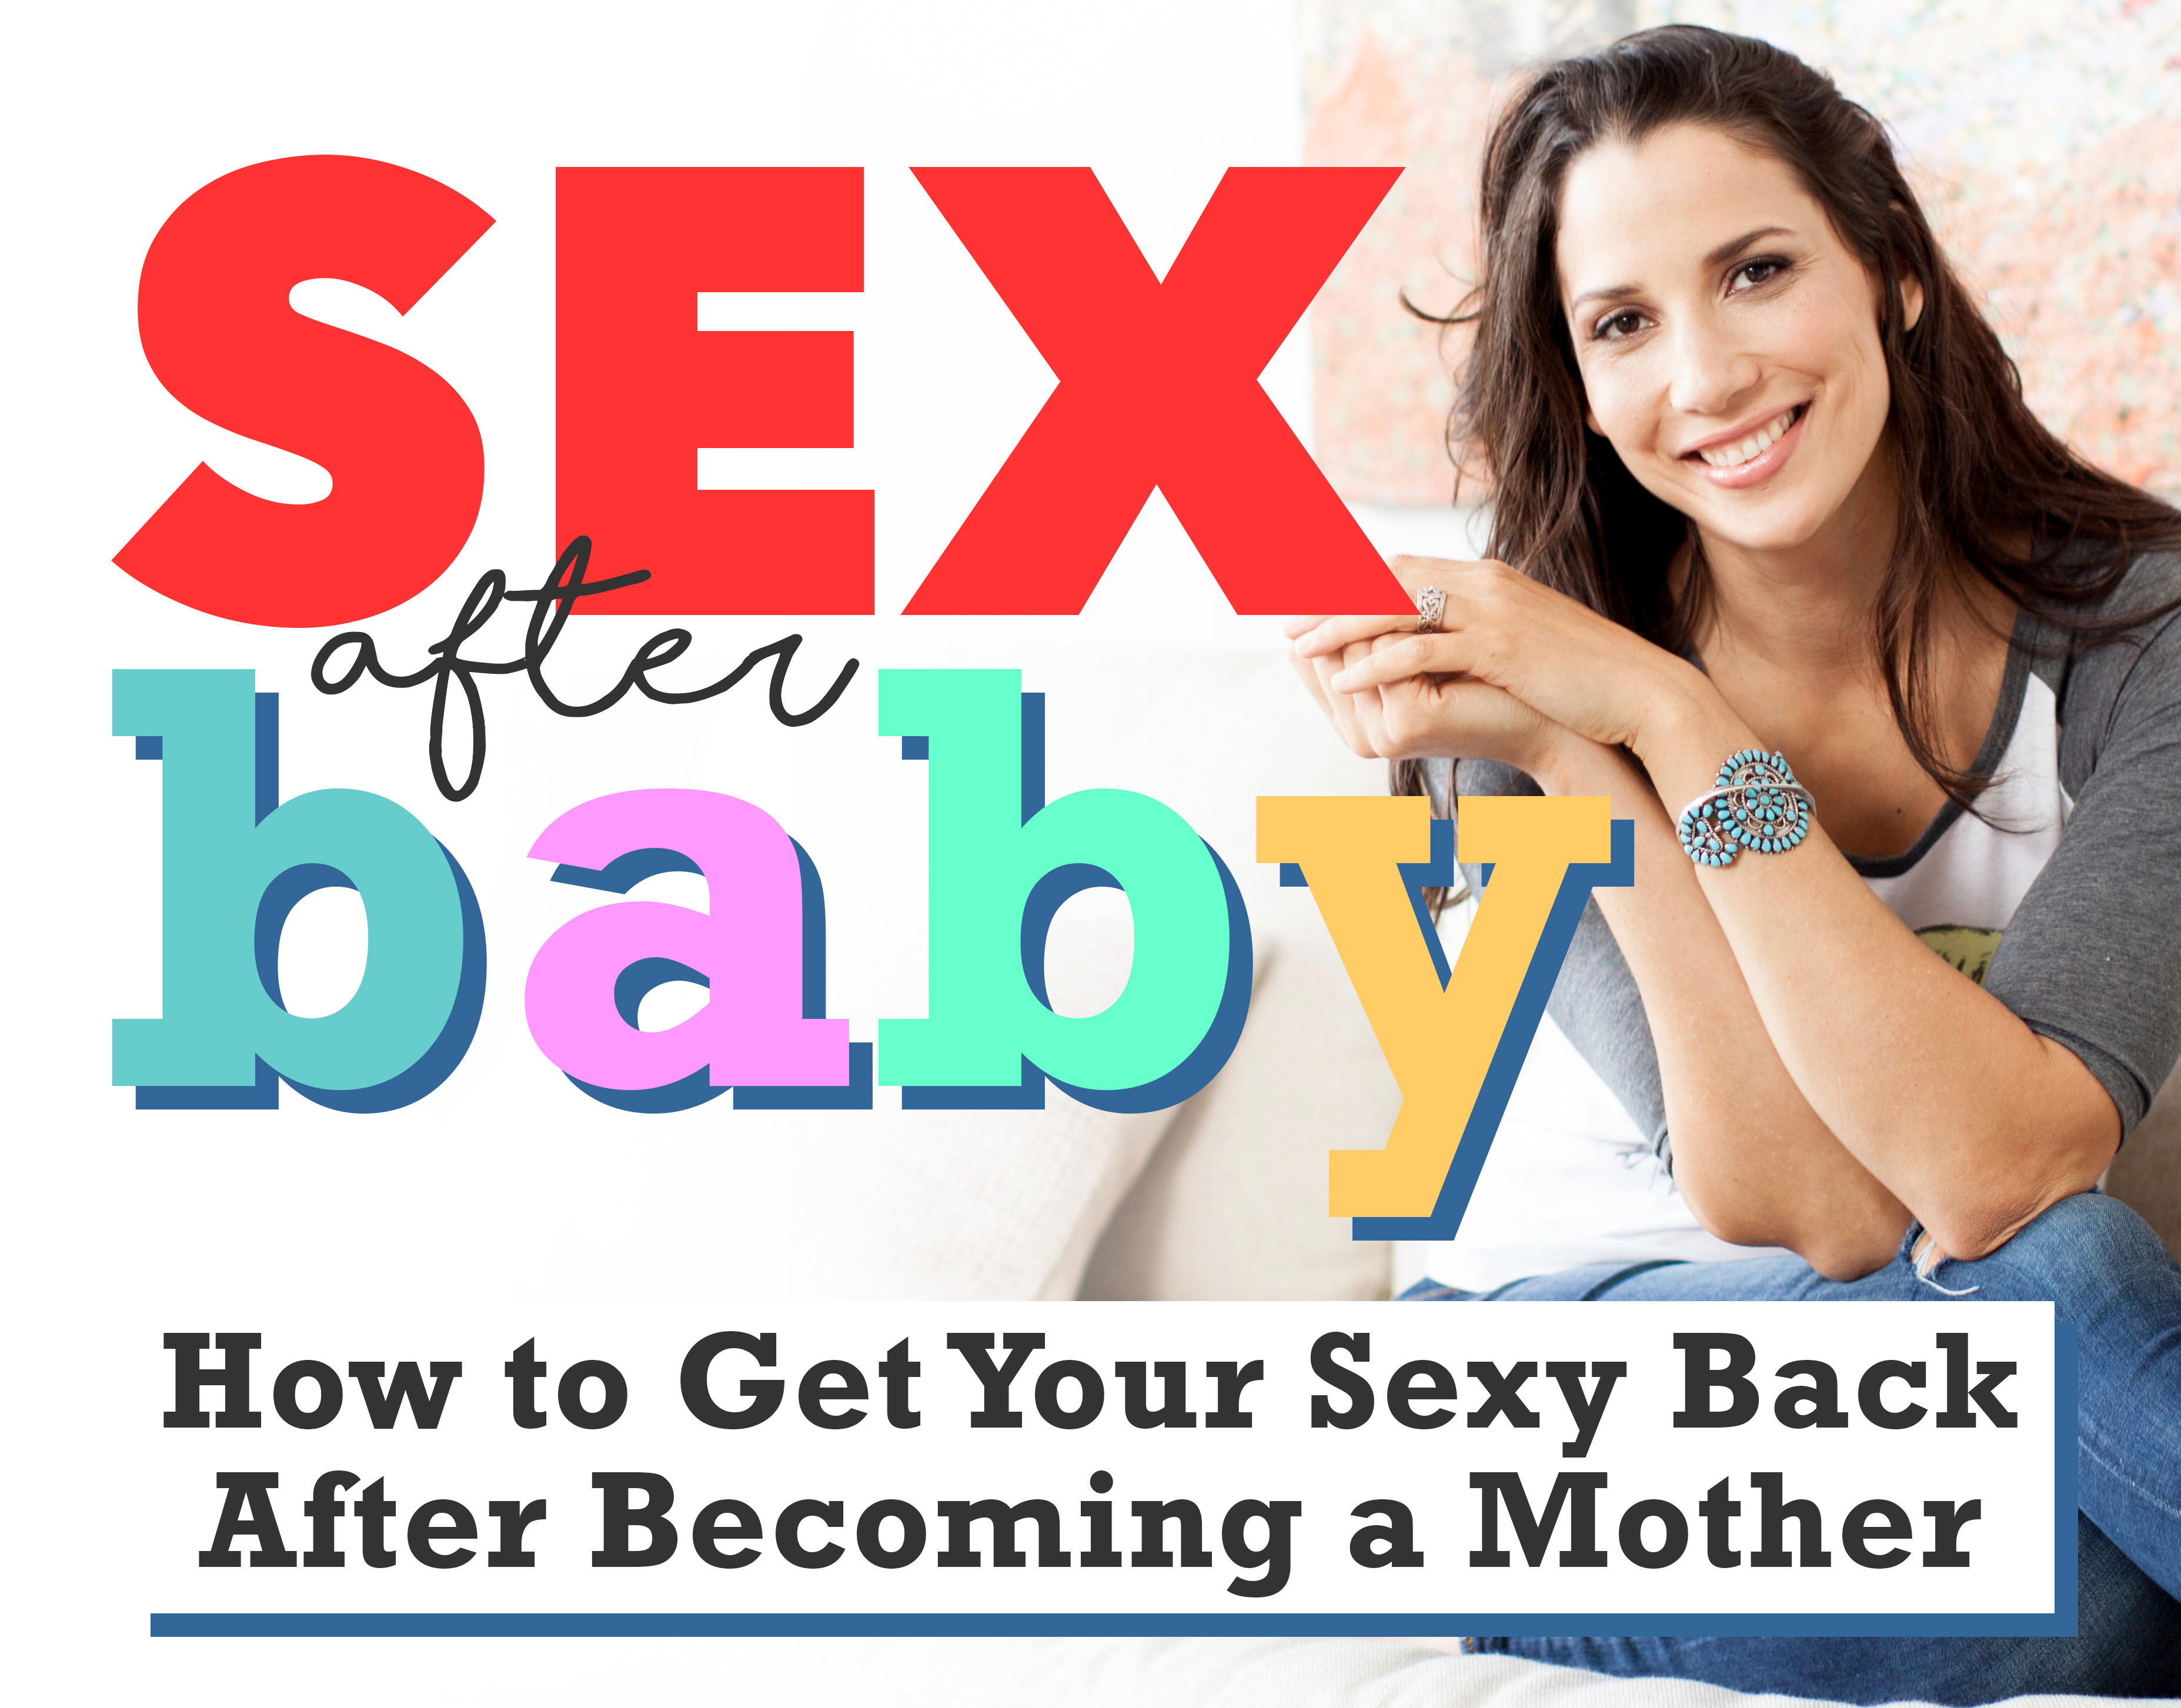 Sex (and Feeling Sexy) After Baby - The Mommy Mojo Makeover with Dana B. Myers and Rebekah Borucki